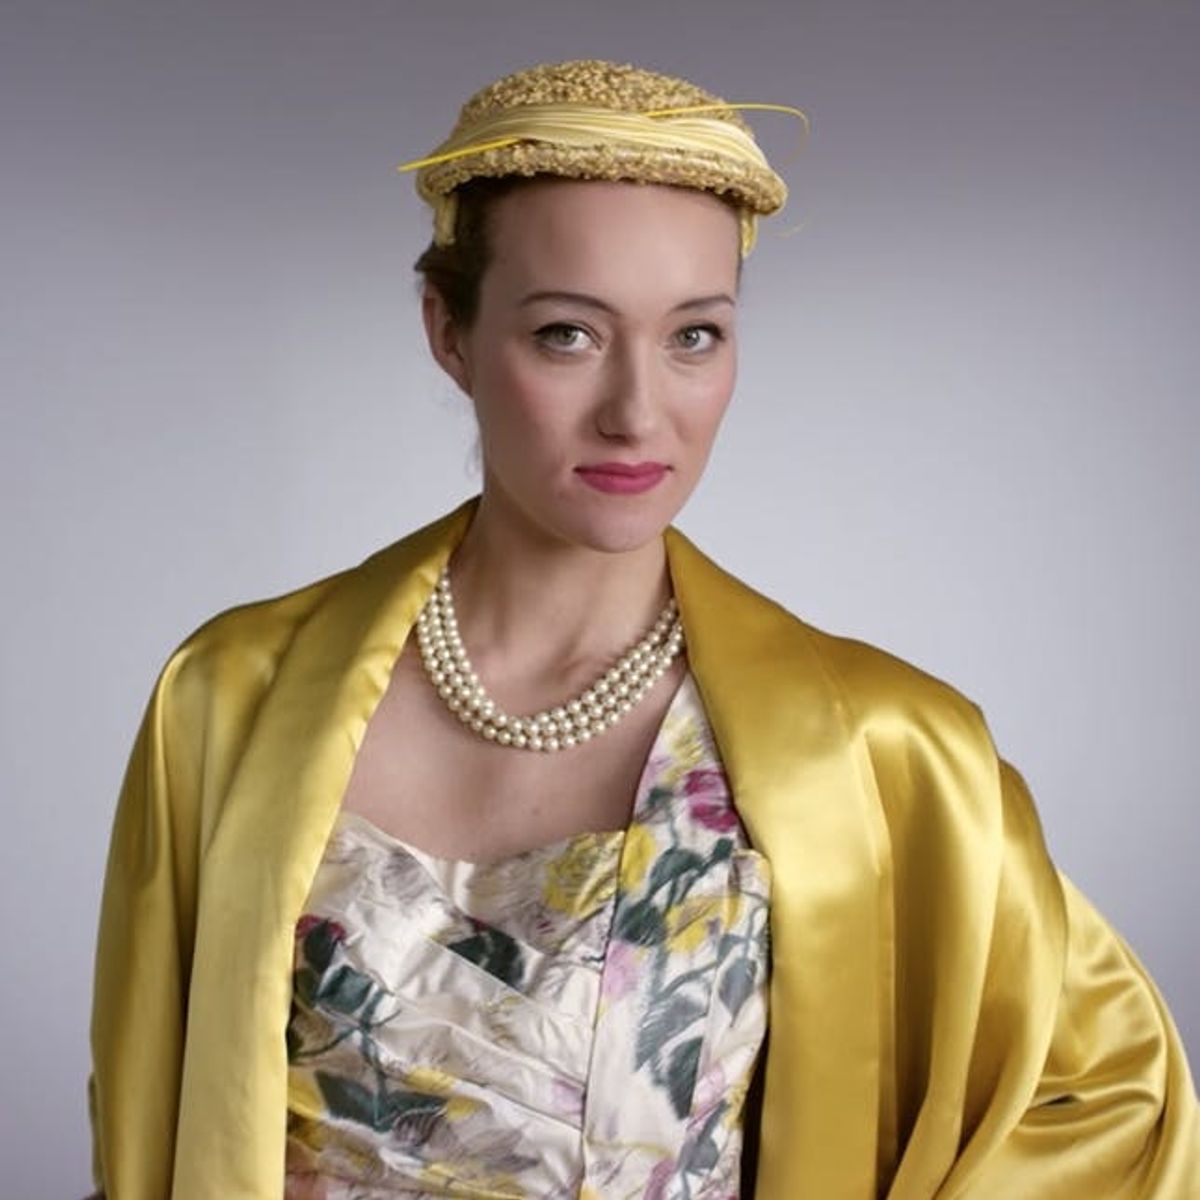 Experience 100 Years of American Fashion in This 2-Minute Video